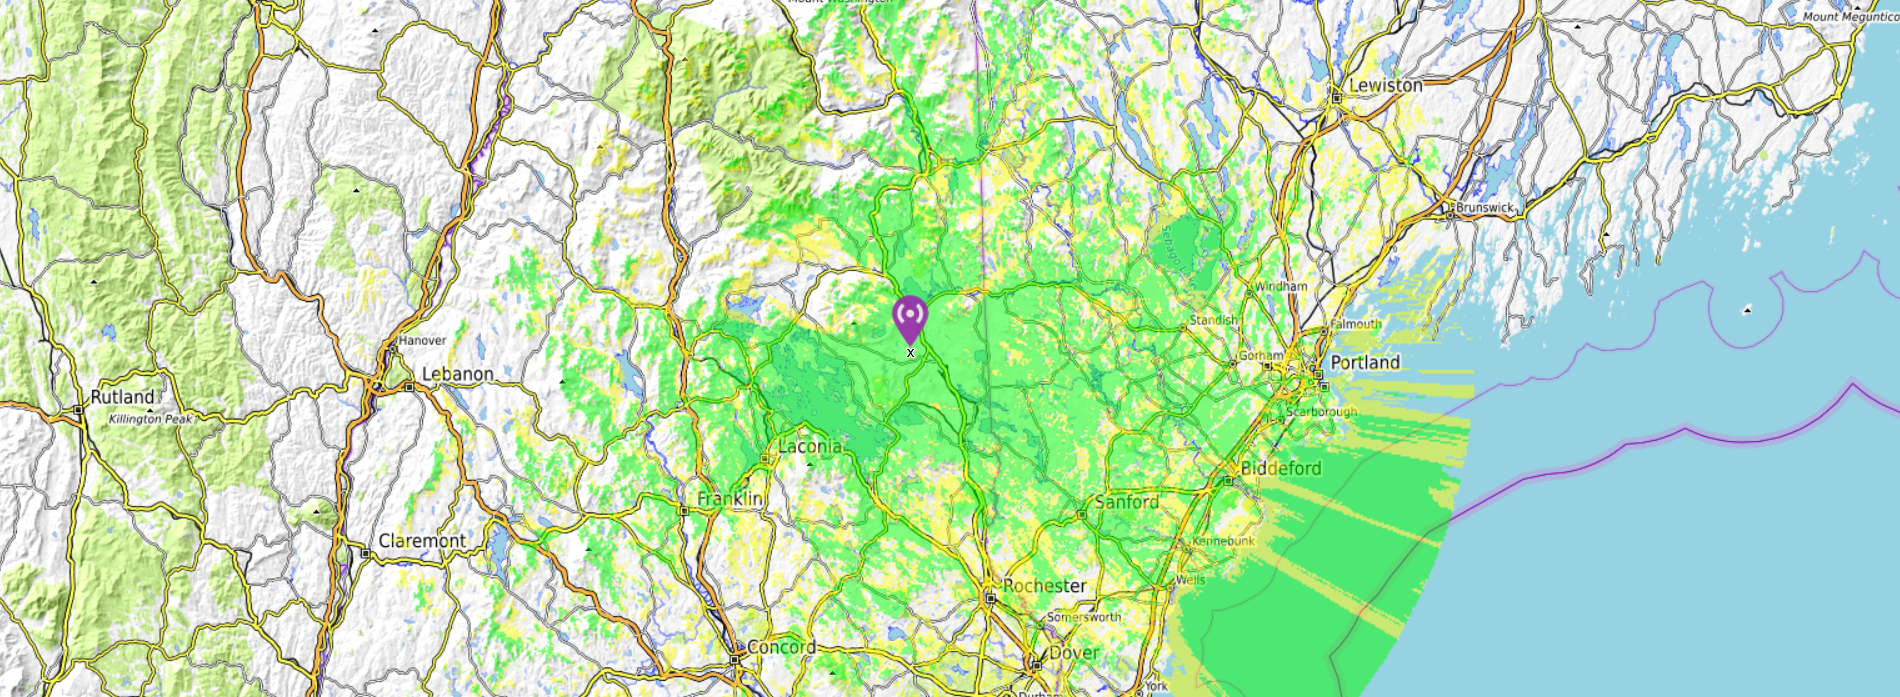 442.100 mhz rf coverage map